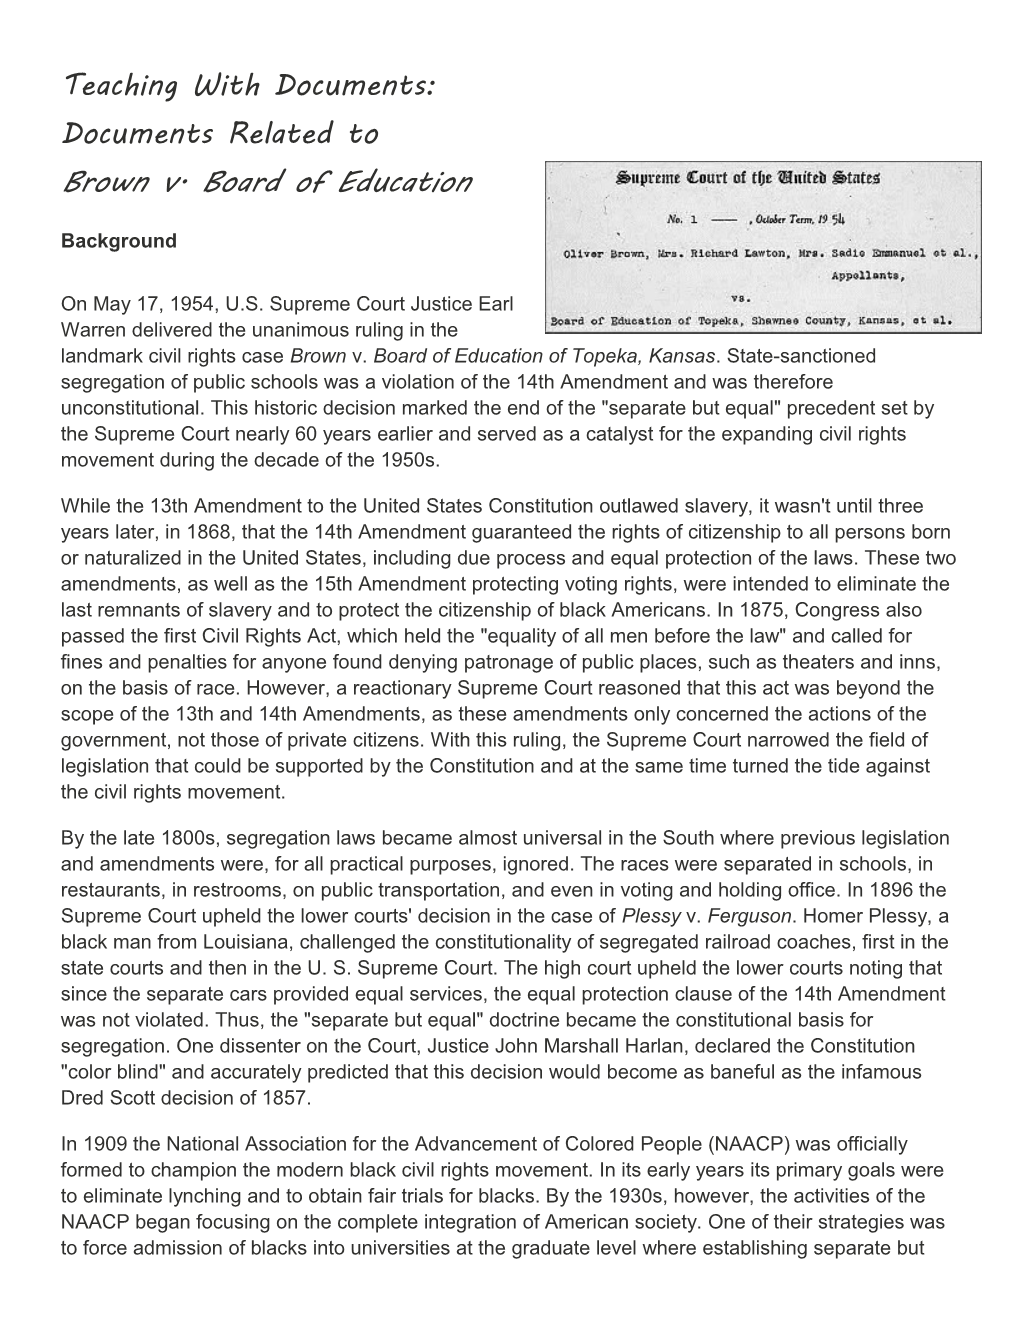 Teaching with Documents: Documents Related to Brown V. Board of Education